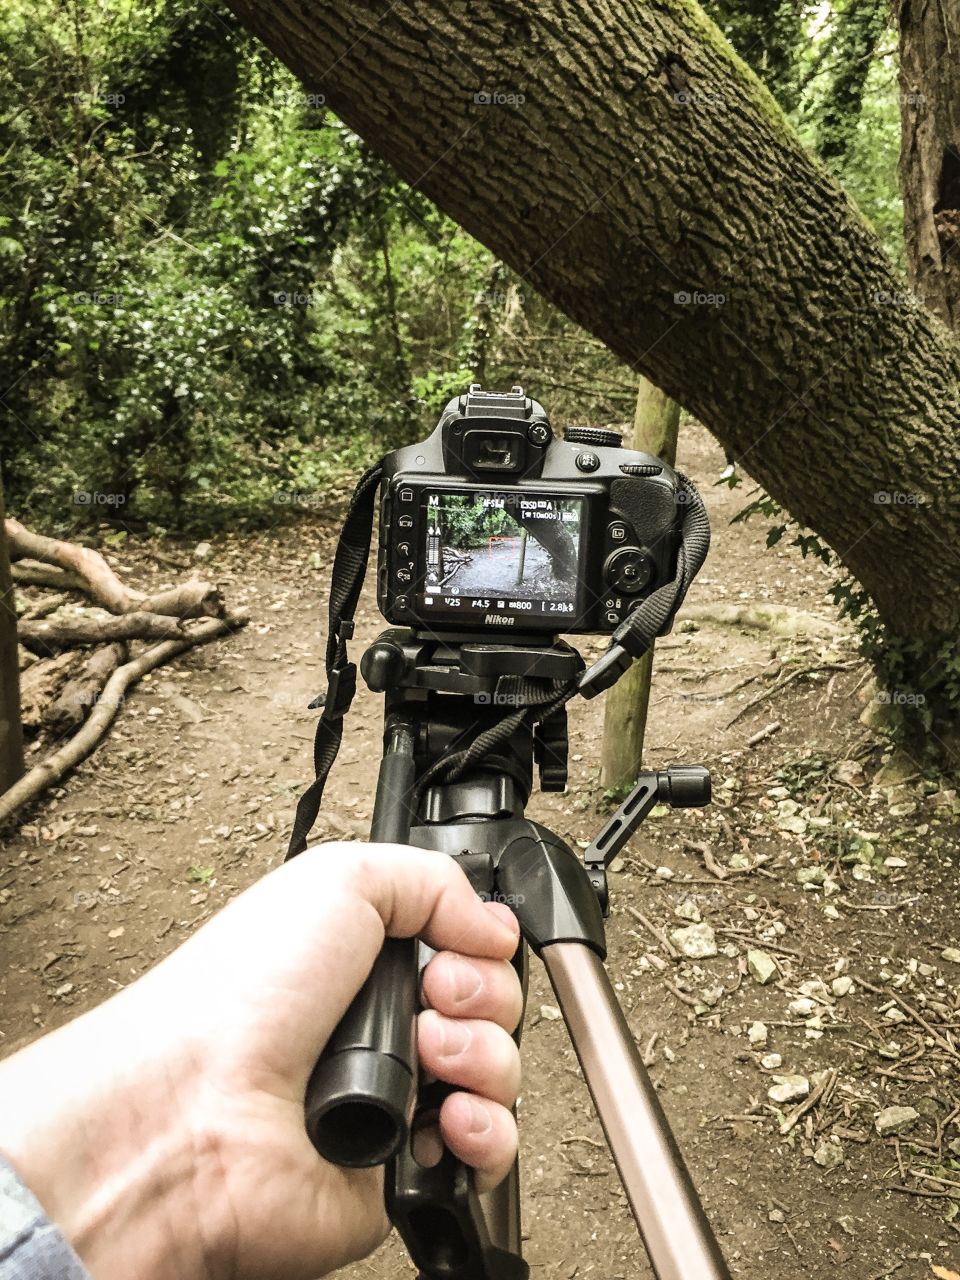 Filming / Photography in the woods